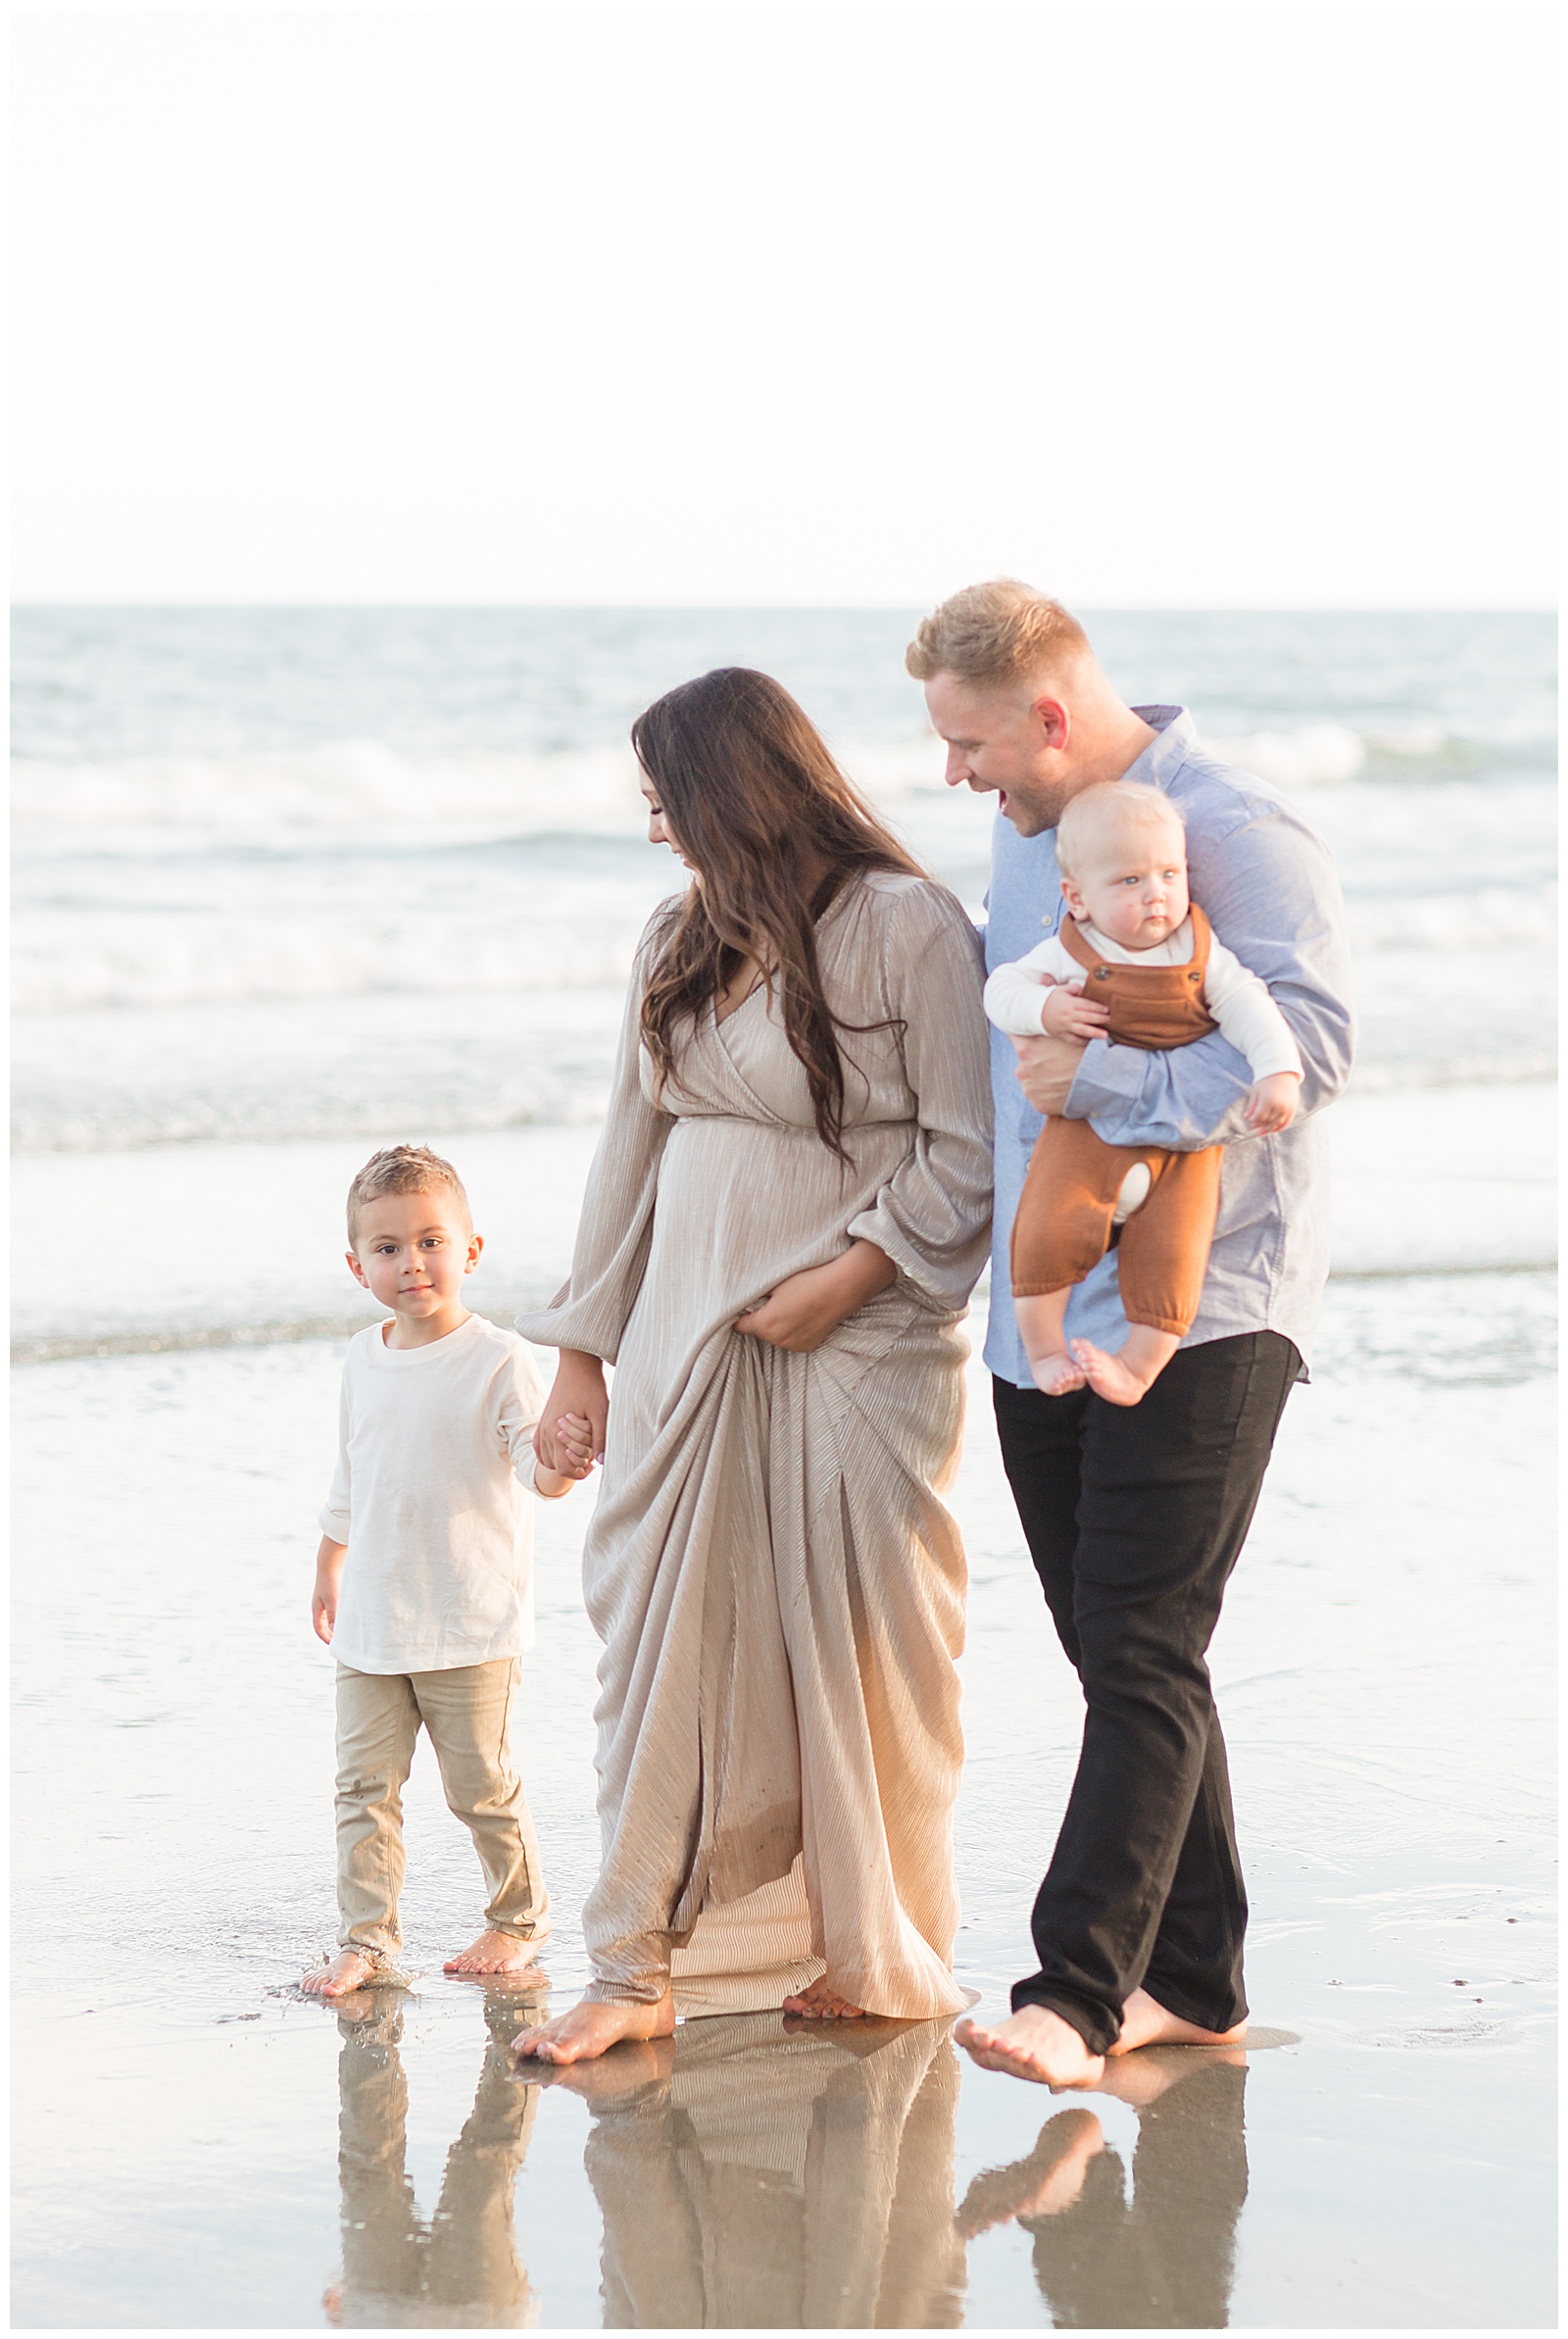 Family photographer, Rebecca Rice, captures family walking down the beach of the Isle of Palms beach in Charleston, SC.